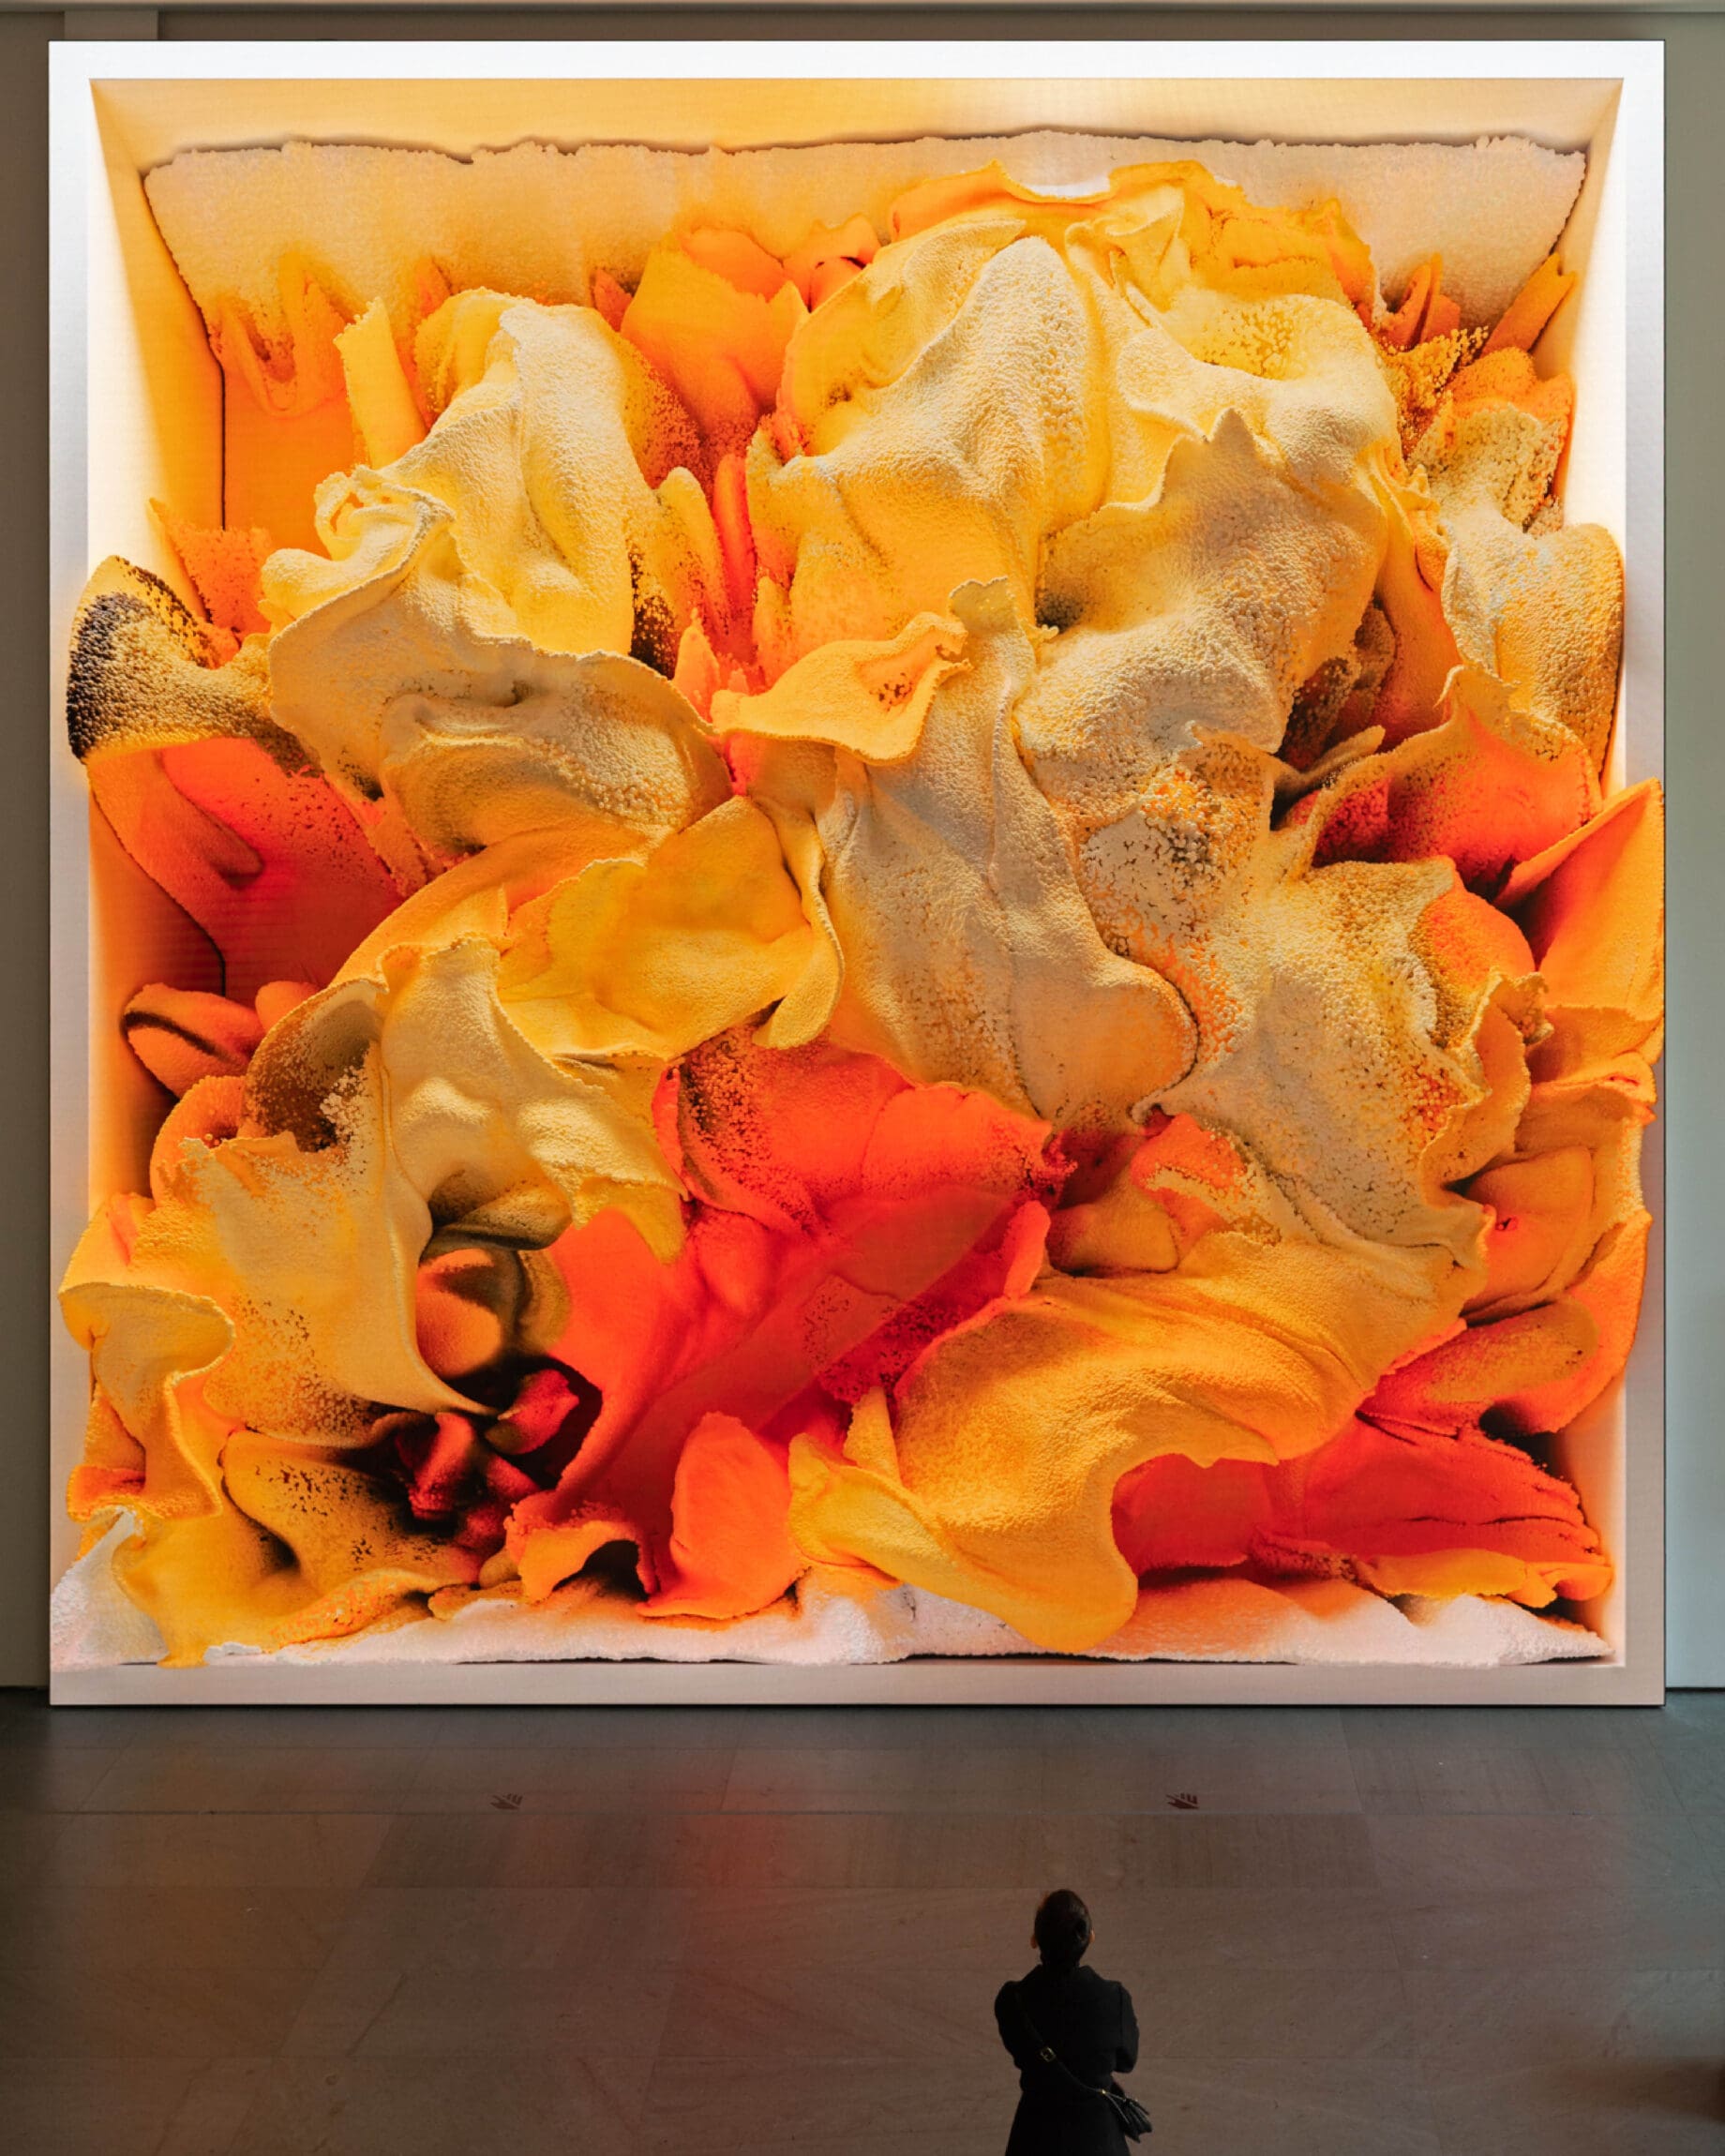 The best art galleries and museums in New York City | Museum of Modern Art "MOMA" orange large scale art piece